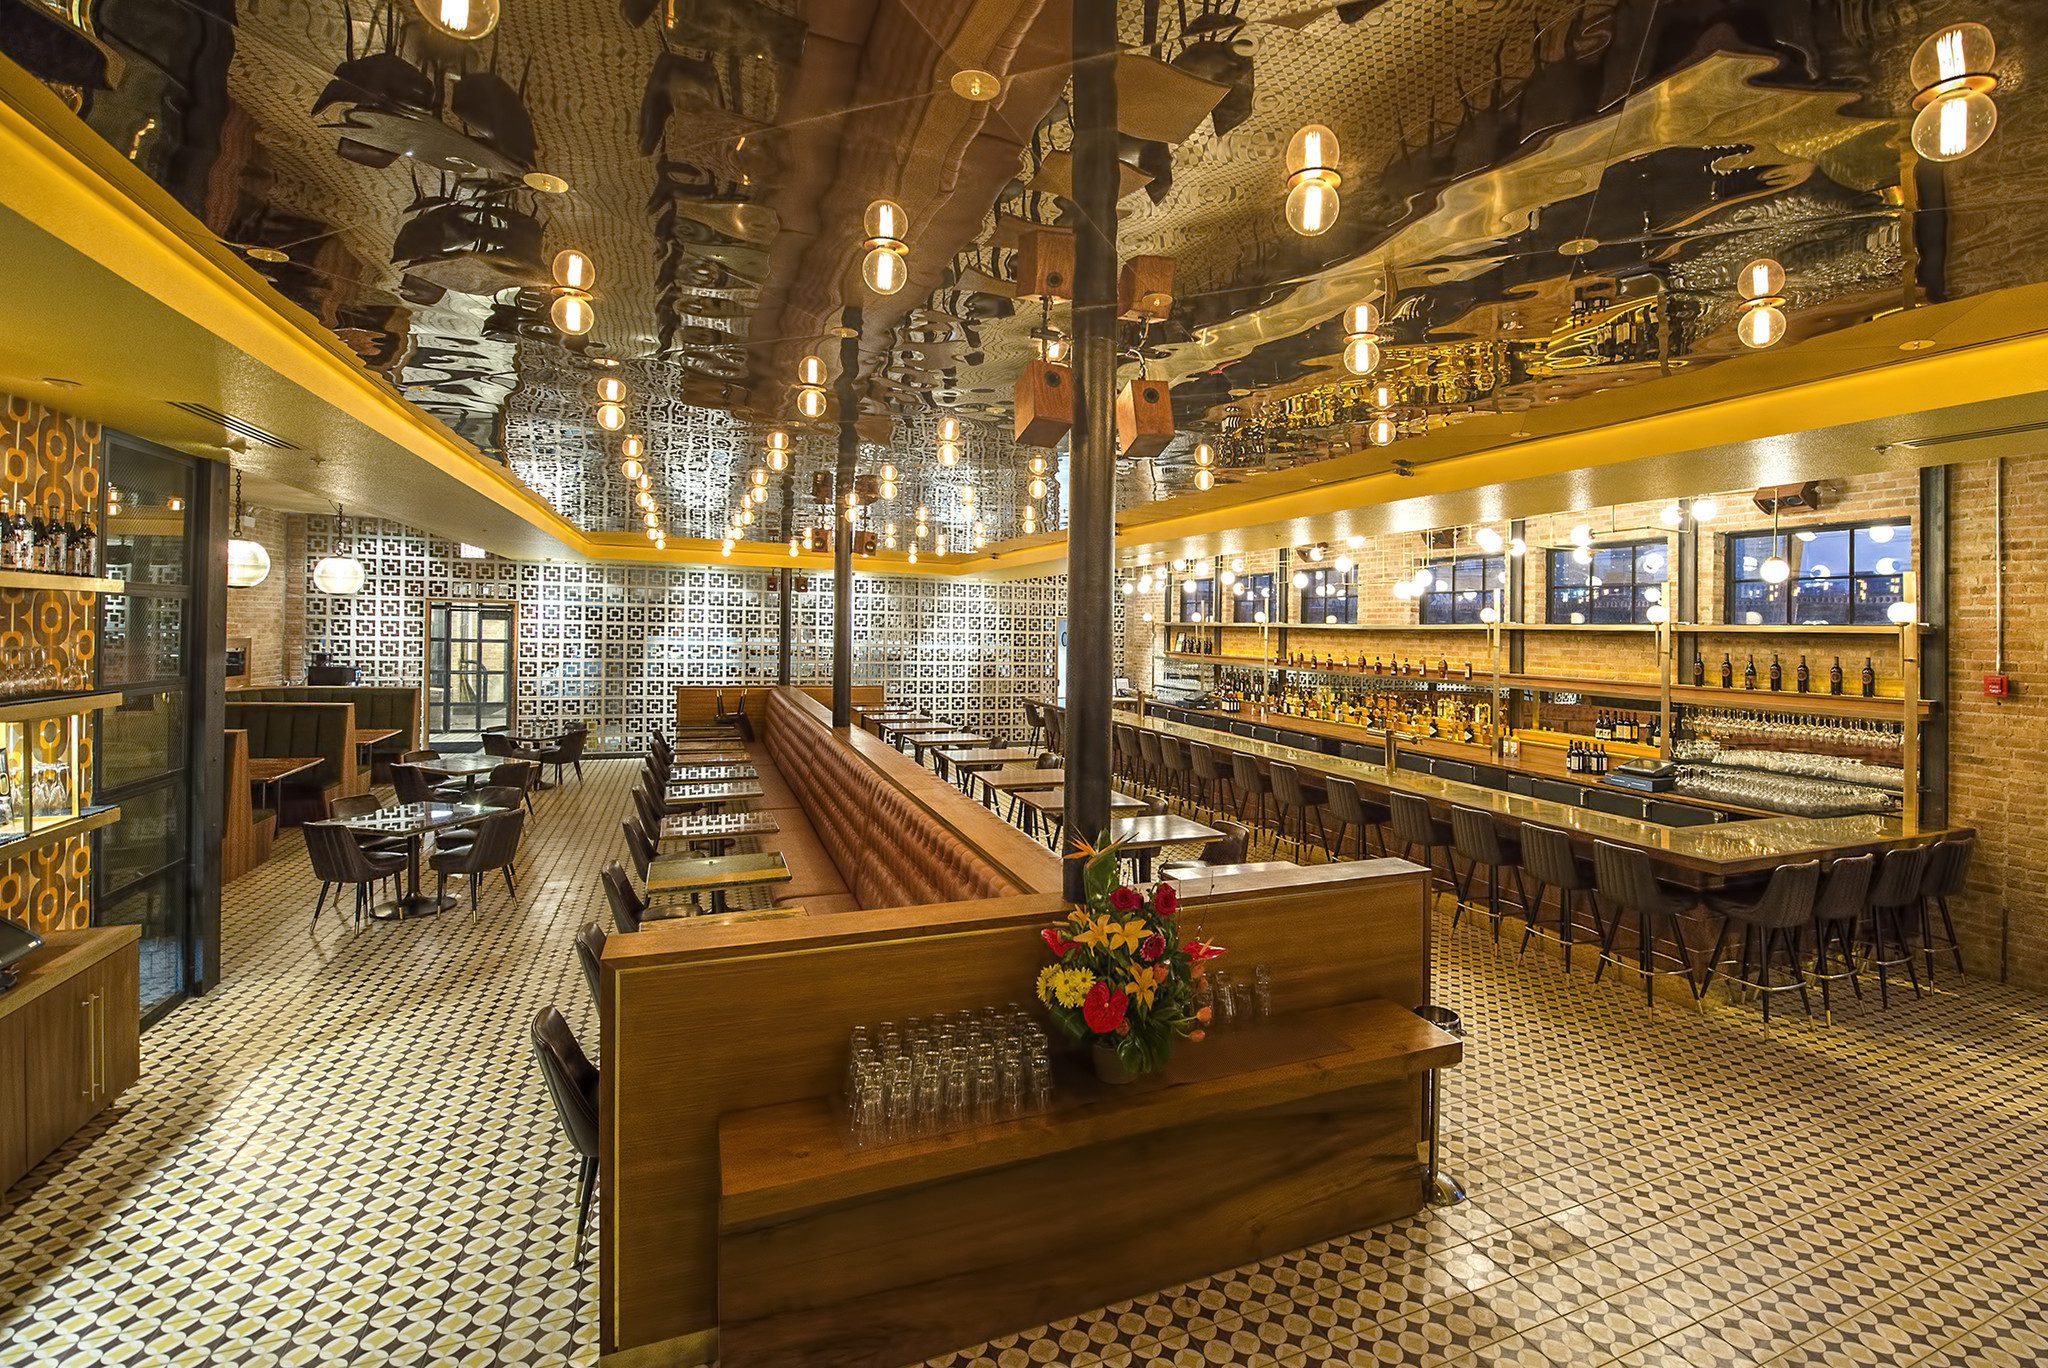 The Brass Monkey, a combination '70s American-themed restaurant and